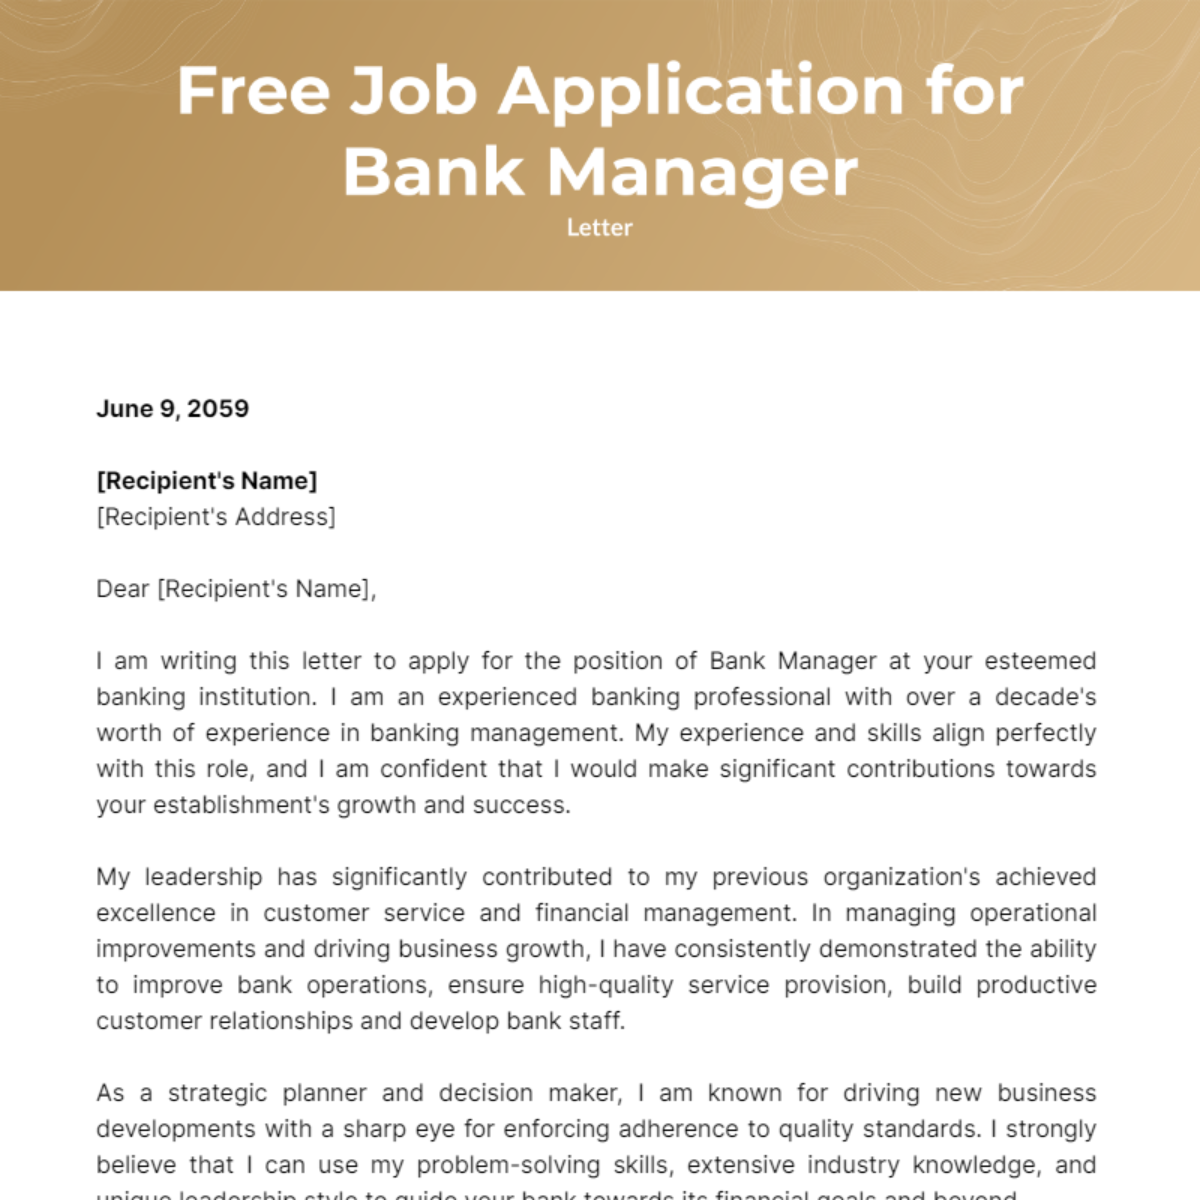 Job Application Letter for Bank Manager Template